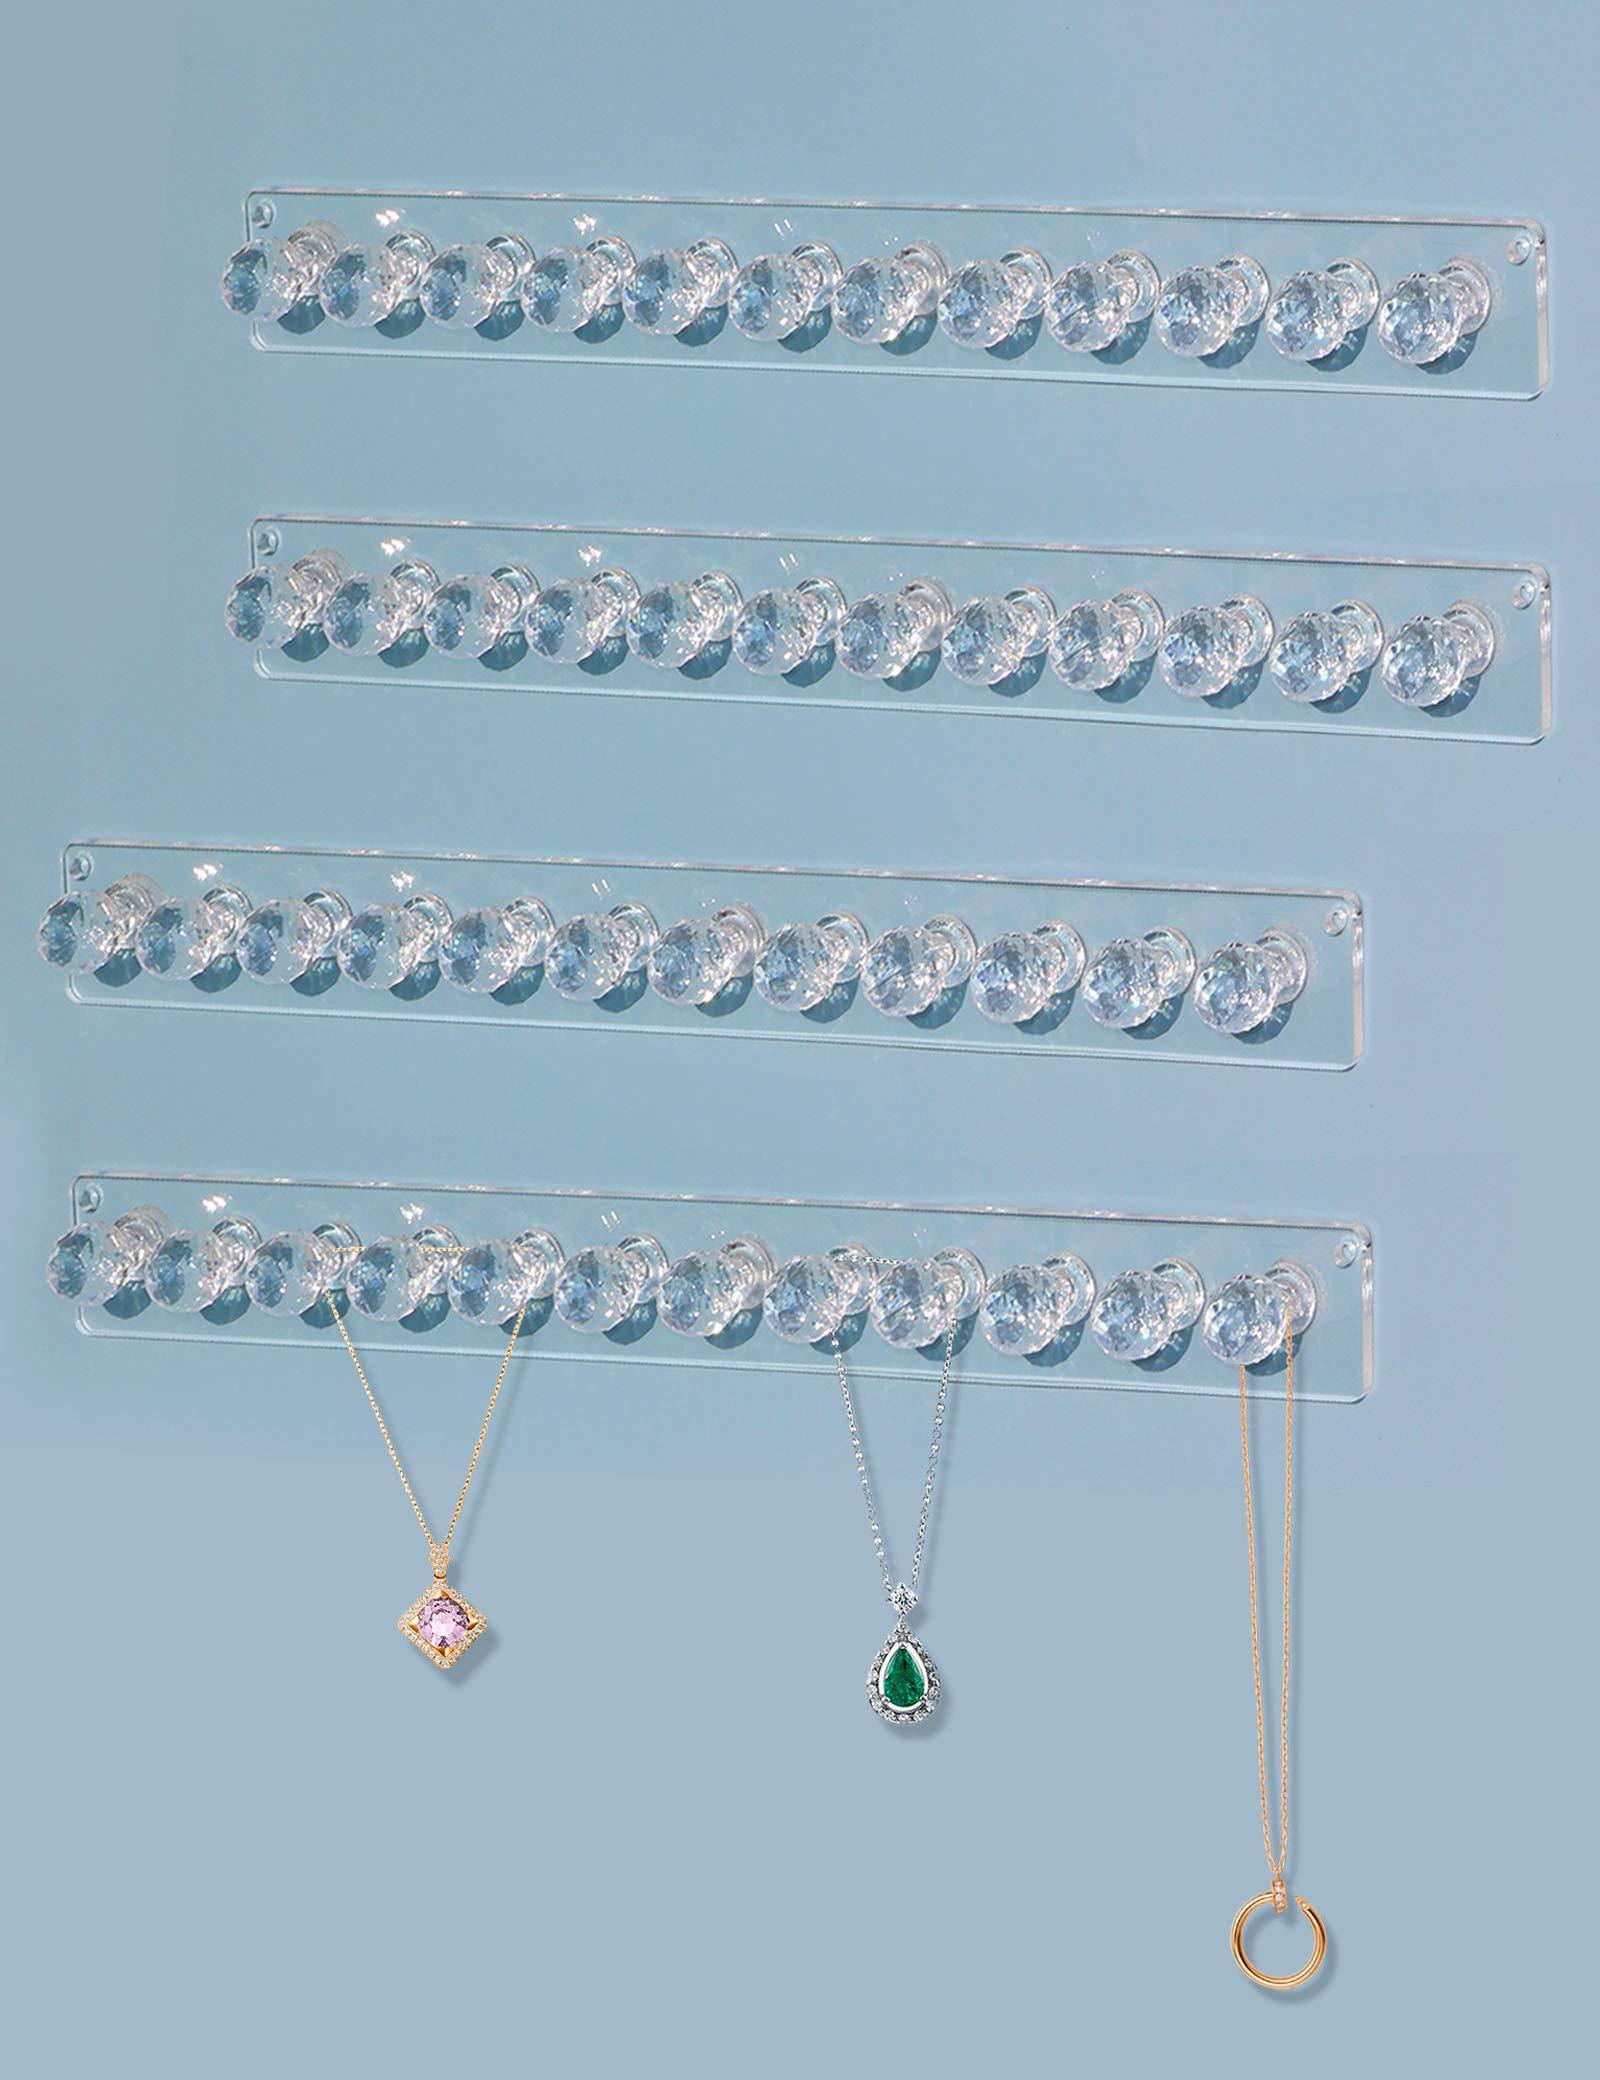 Necklace Holder, Acrylic Necklace Hanger, Wall Mount Necklace